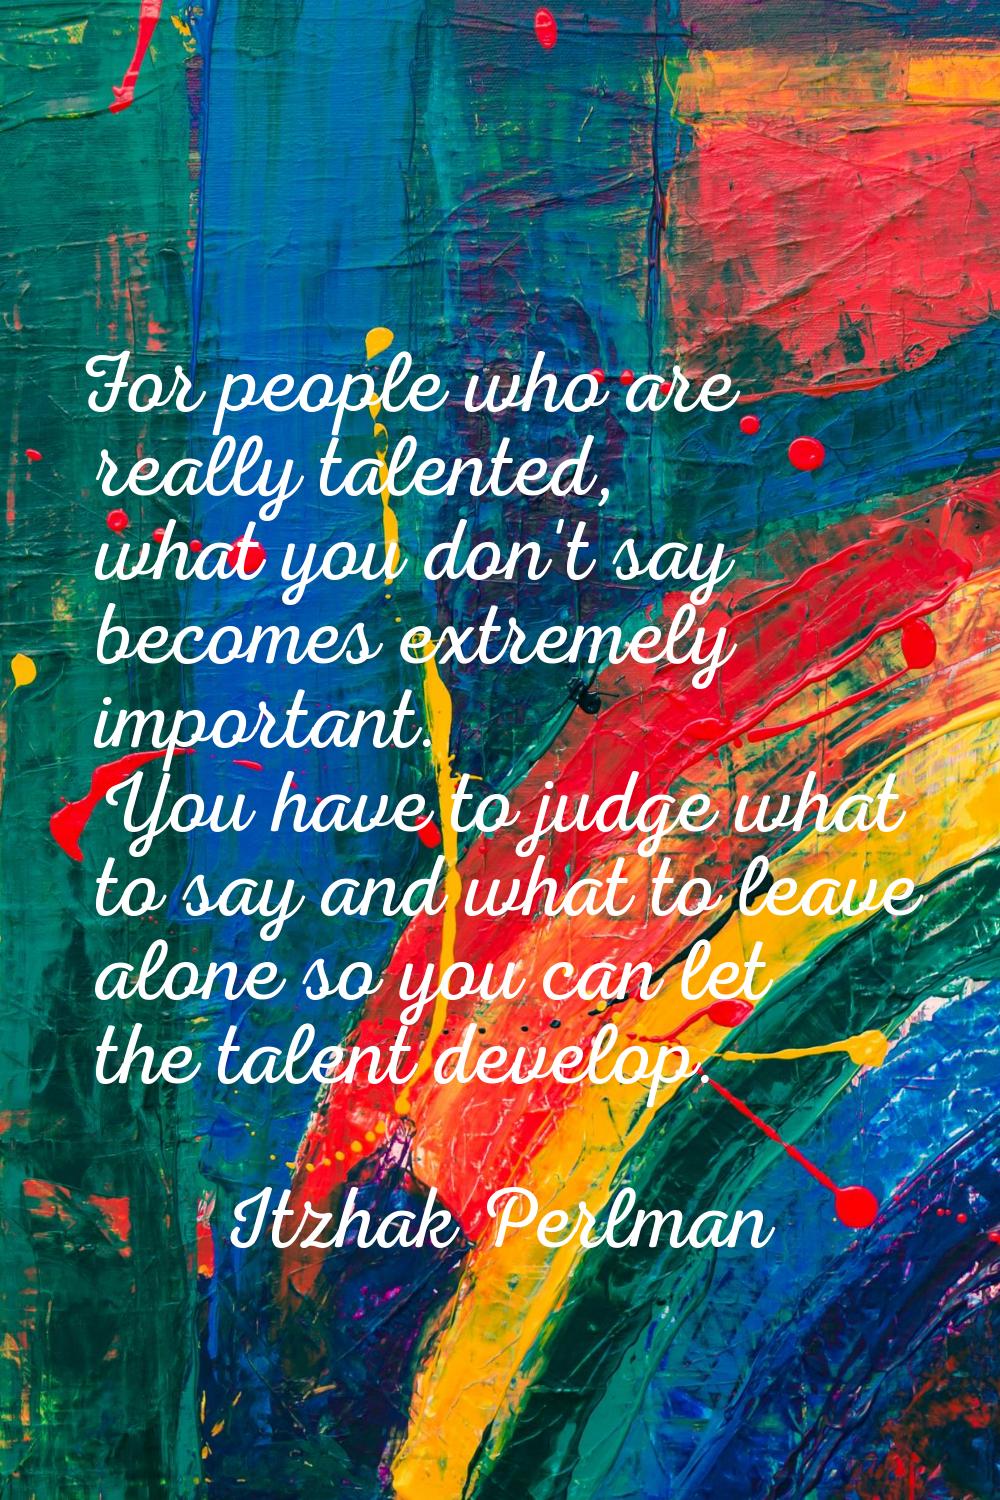 For people who are really talented, what you don't say becomes extremely important. You have to jud